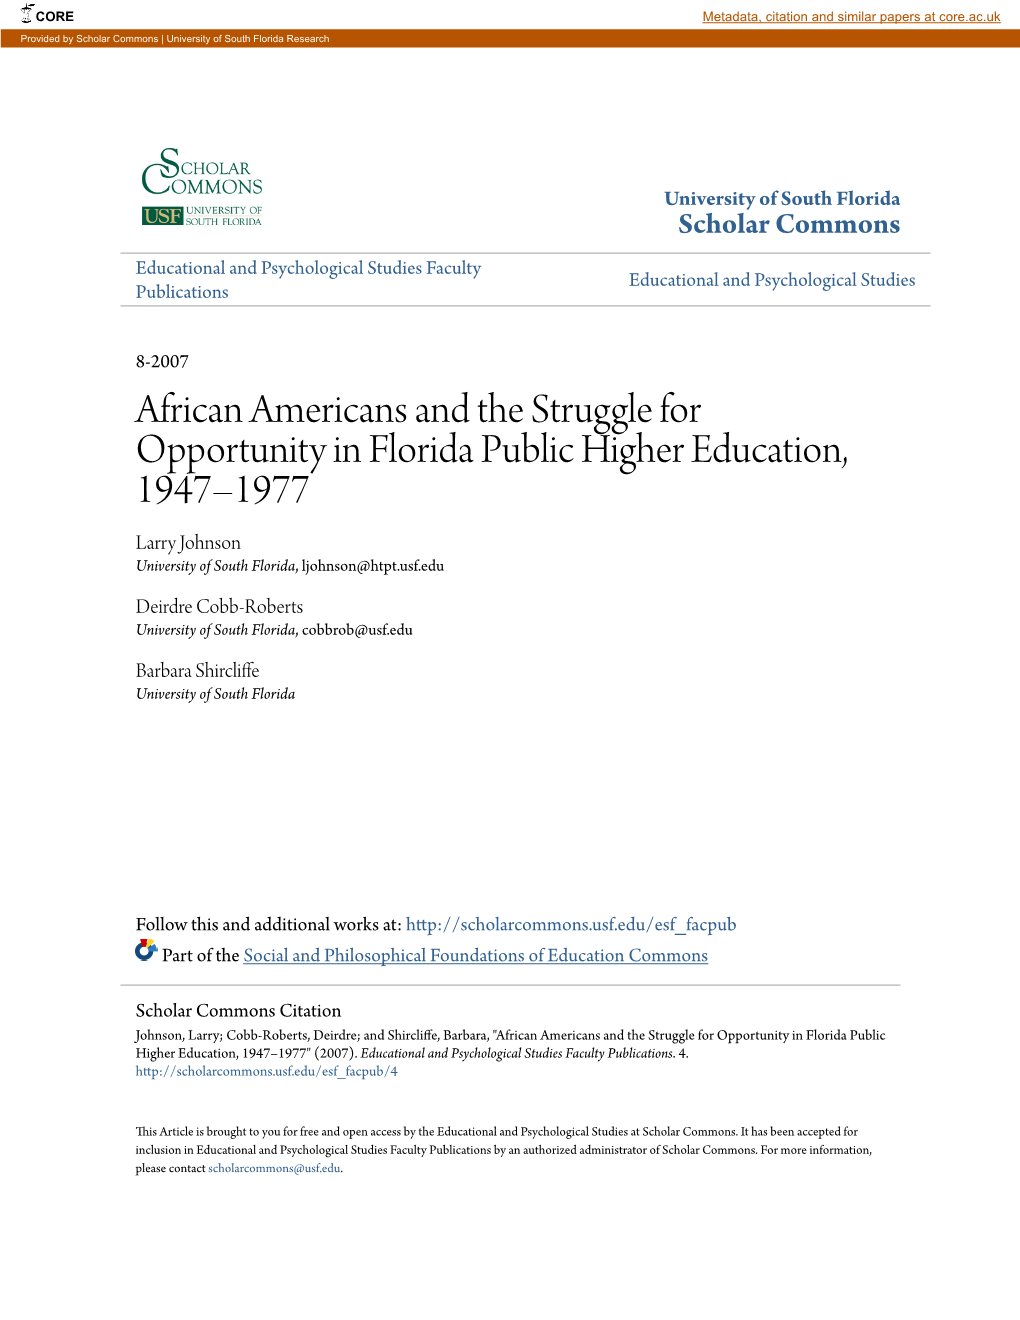 African Americans and the Struggle for Opportunity in Florida Public Higher Education, 1947–1977 Larry Johnson University of South Florida, Ljohnson@Htpt.Usf.Edu